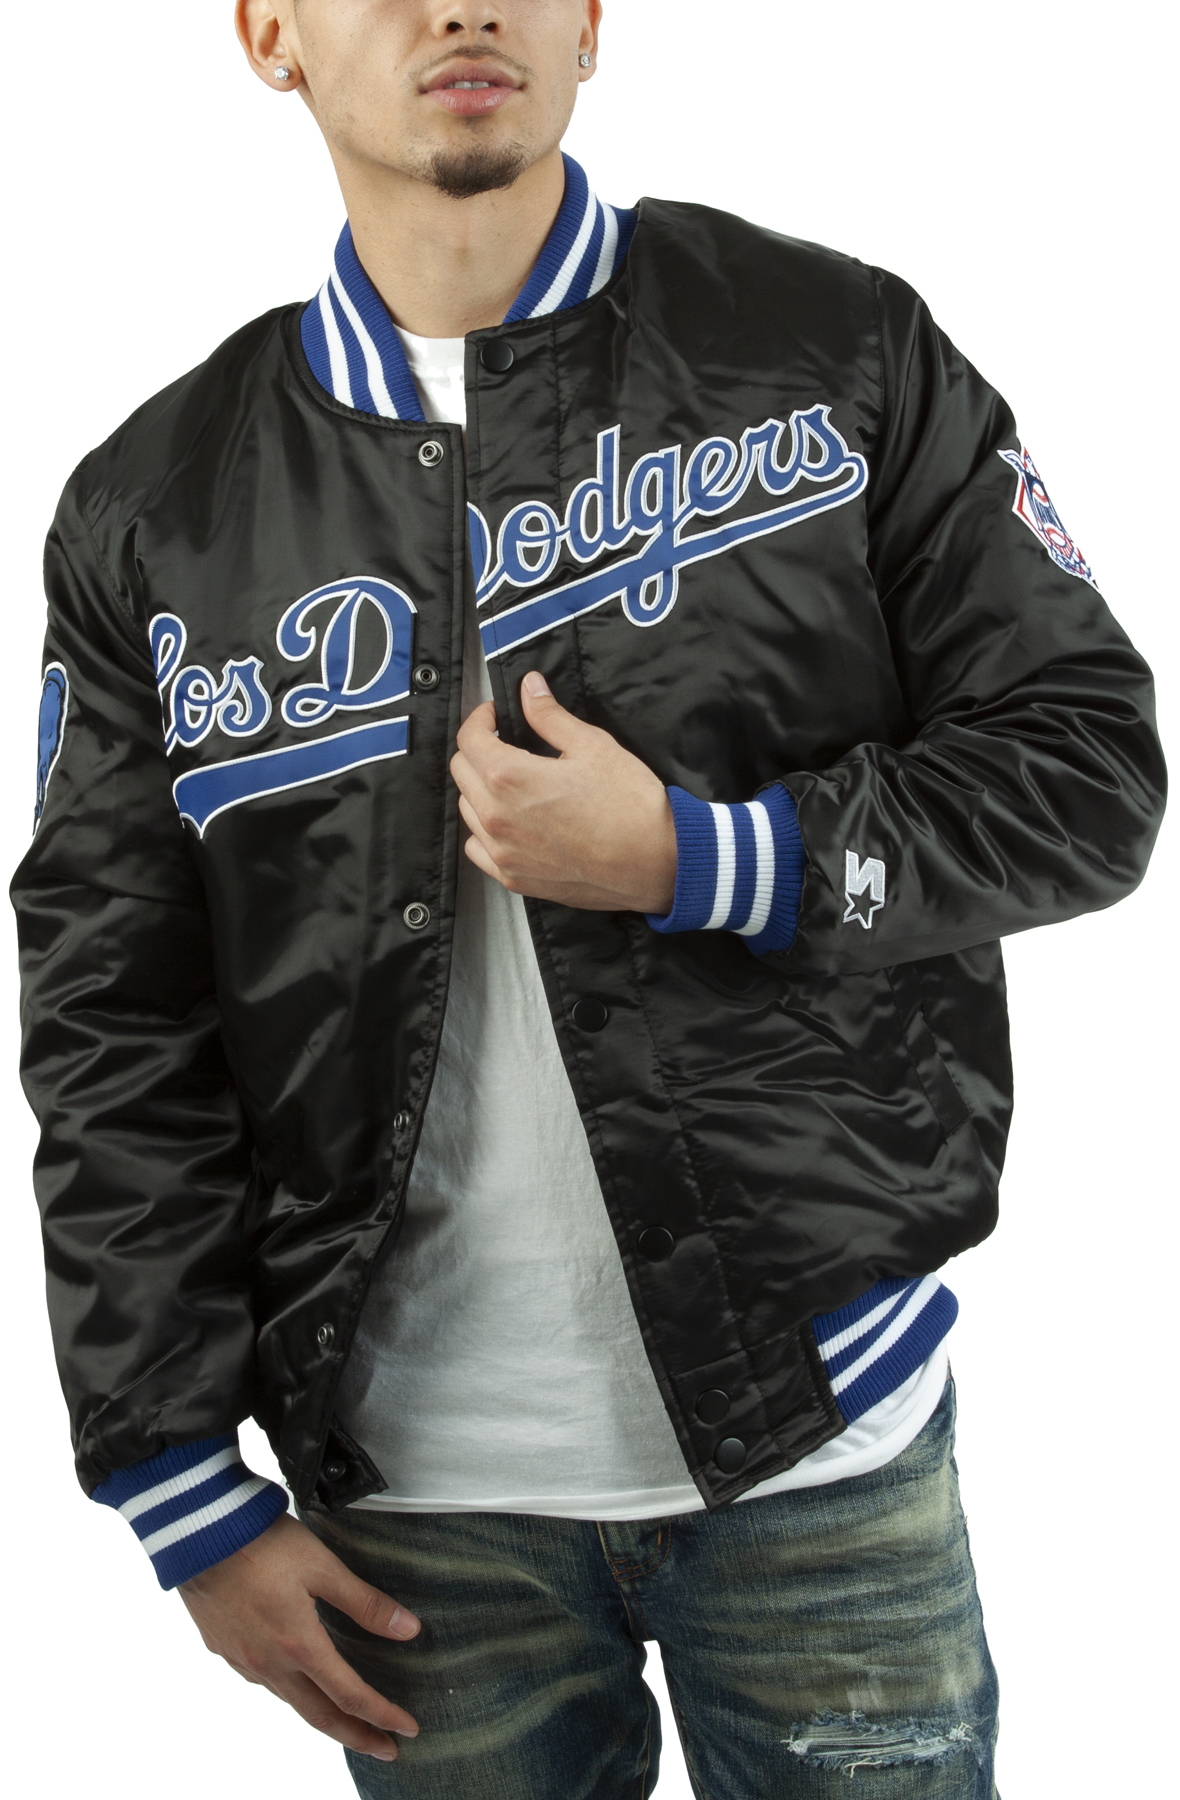 dodger sweaters on sale